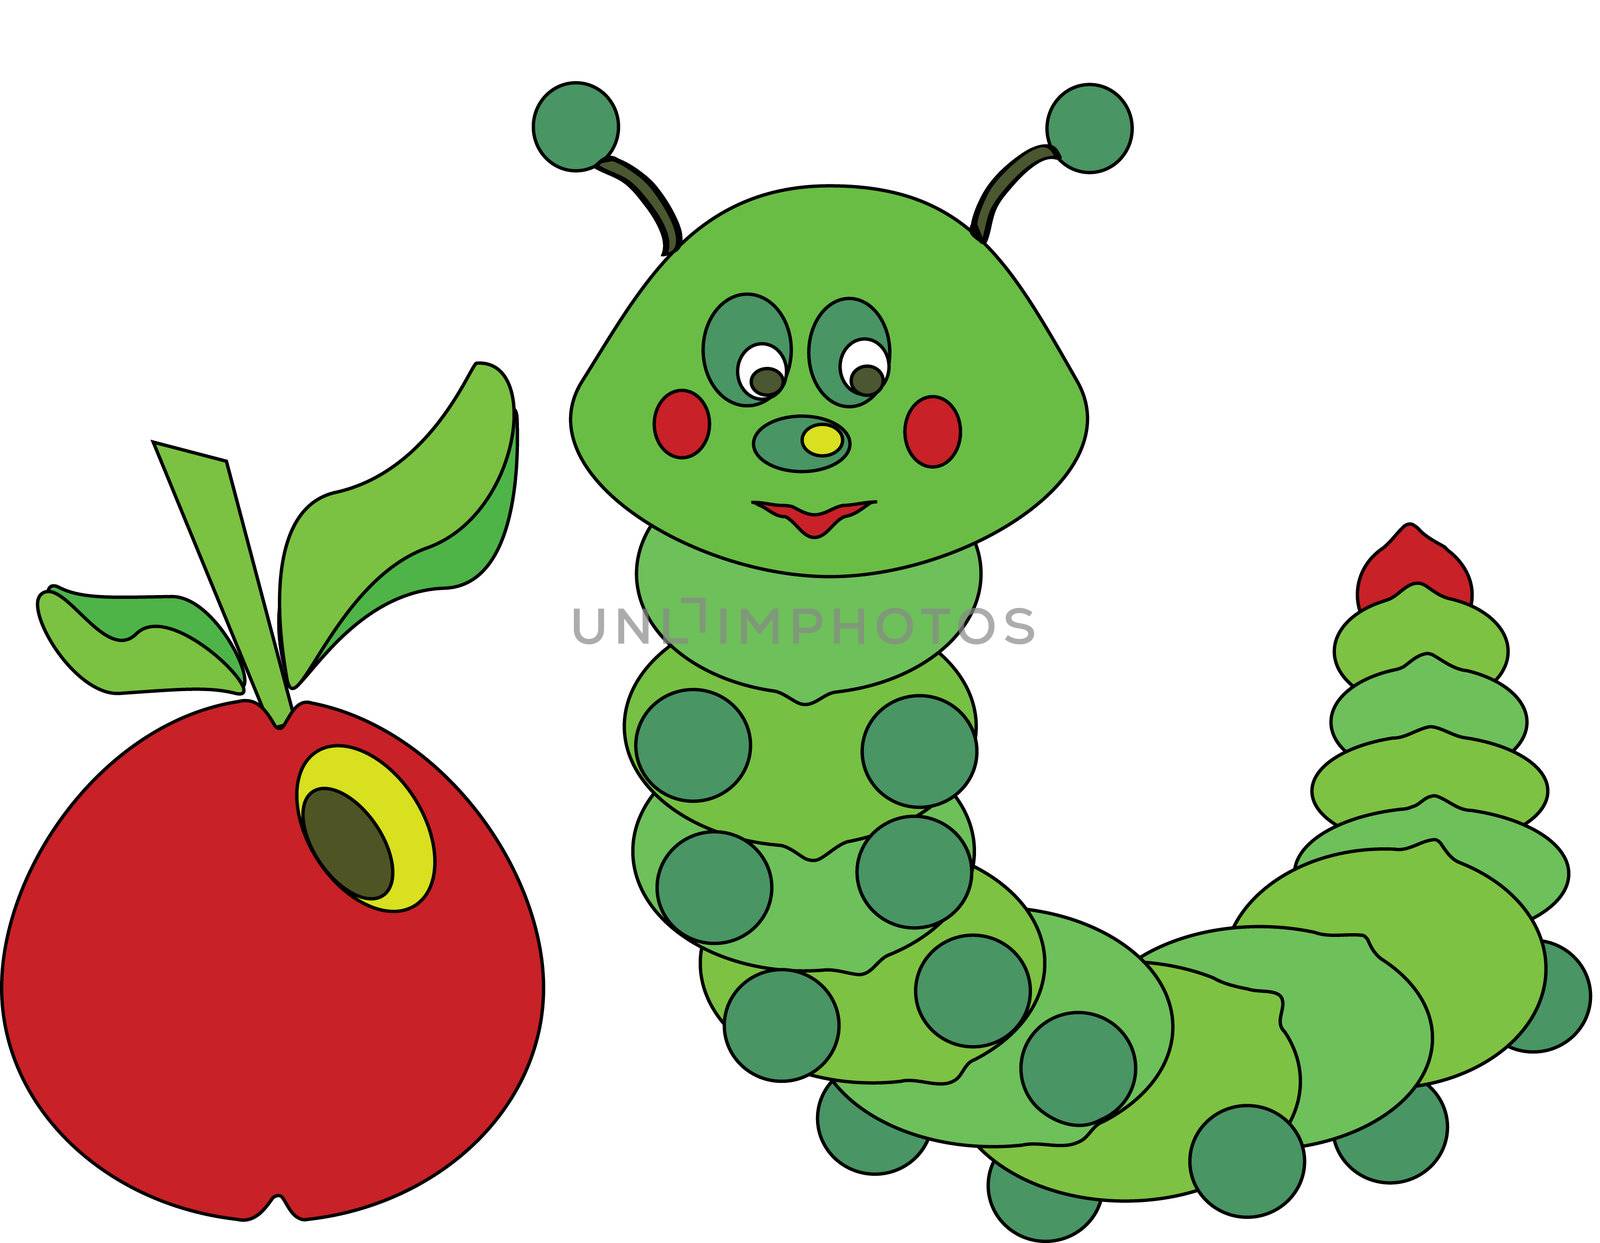 green caterpillar with red apple
